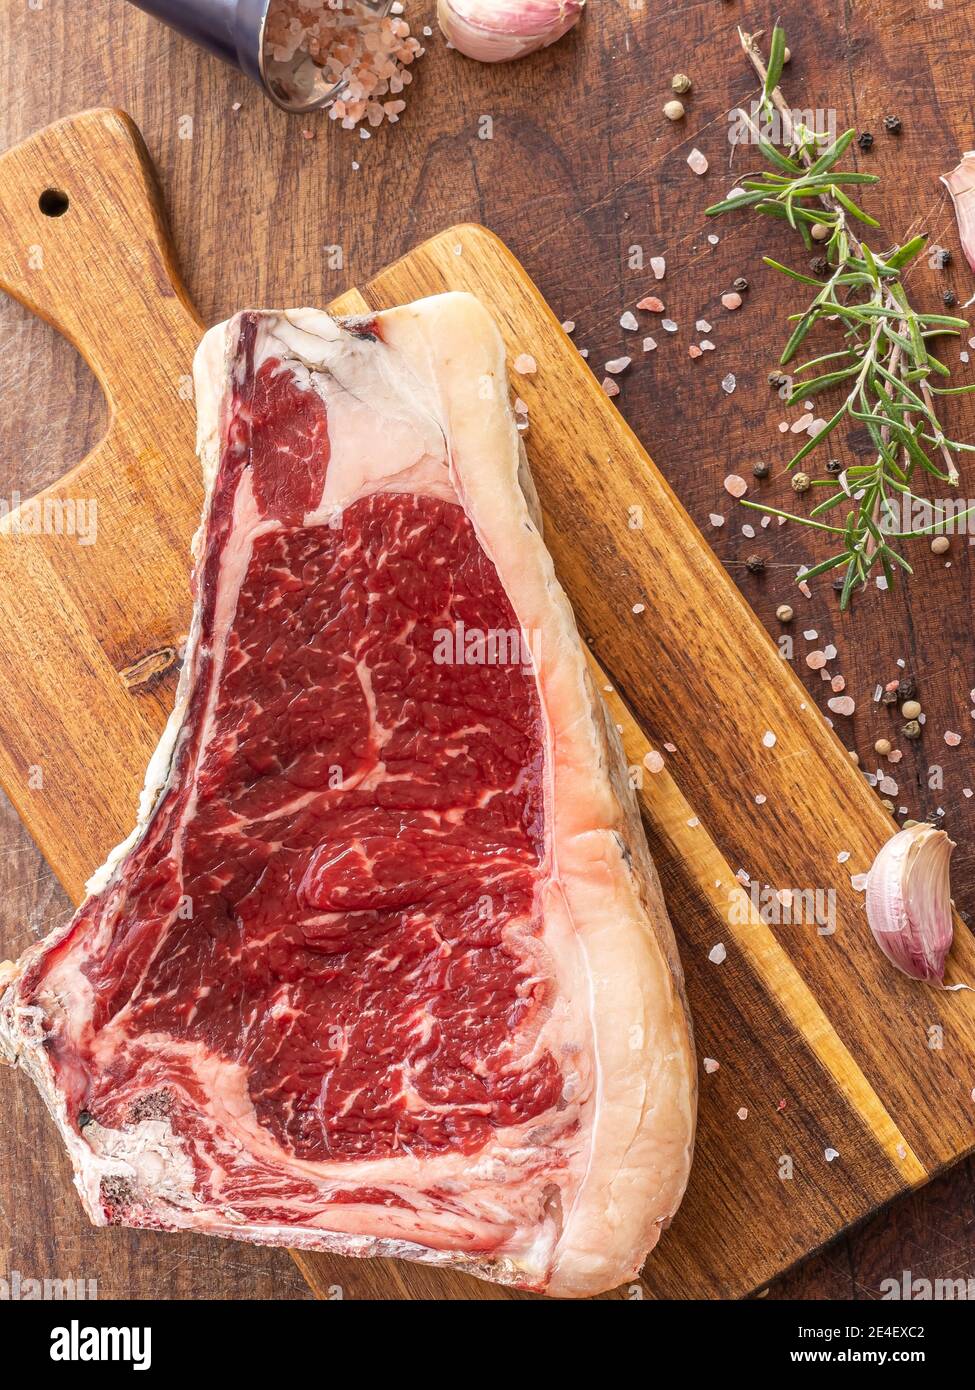 Fresh raw sashi beef steak with rosemary, himalayan salt, garlic and black pepper grains, ready to be cooked Stock Photo